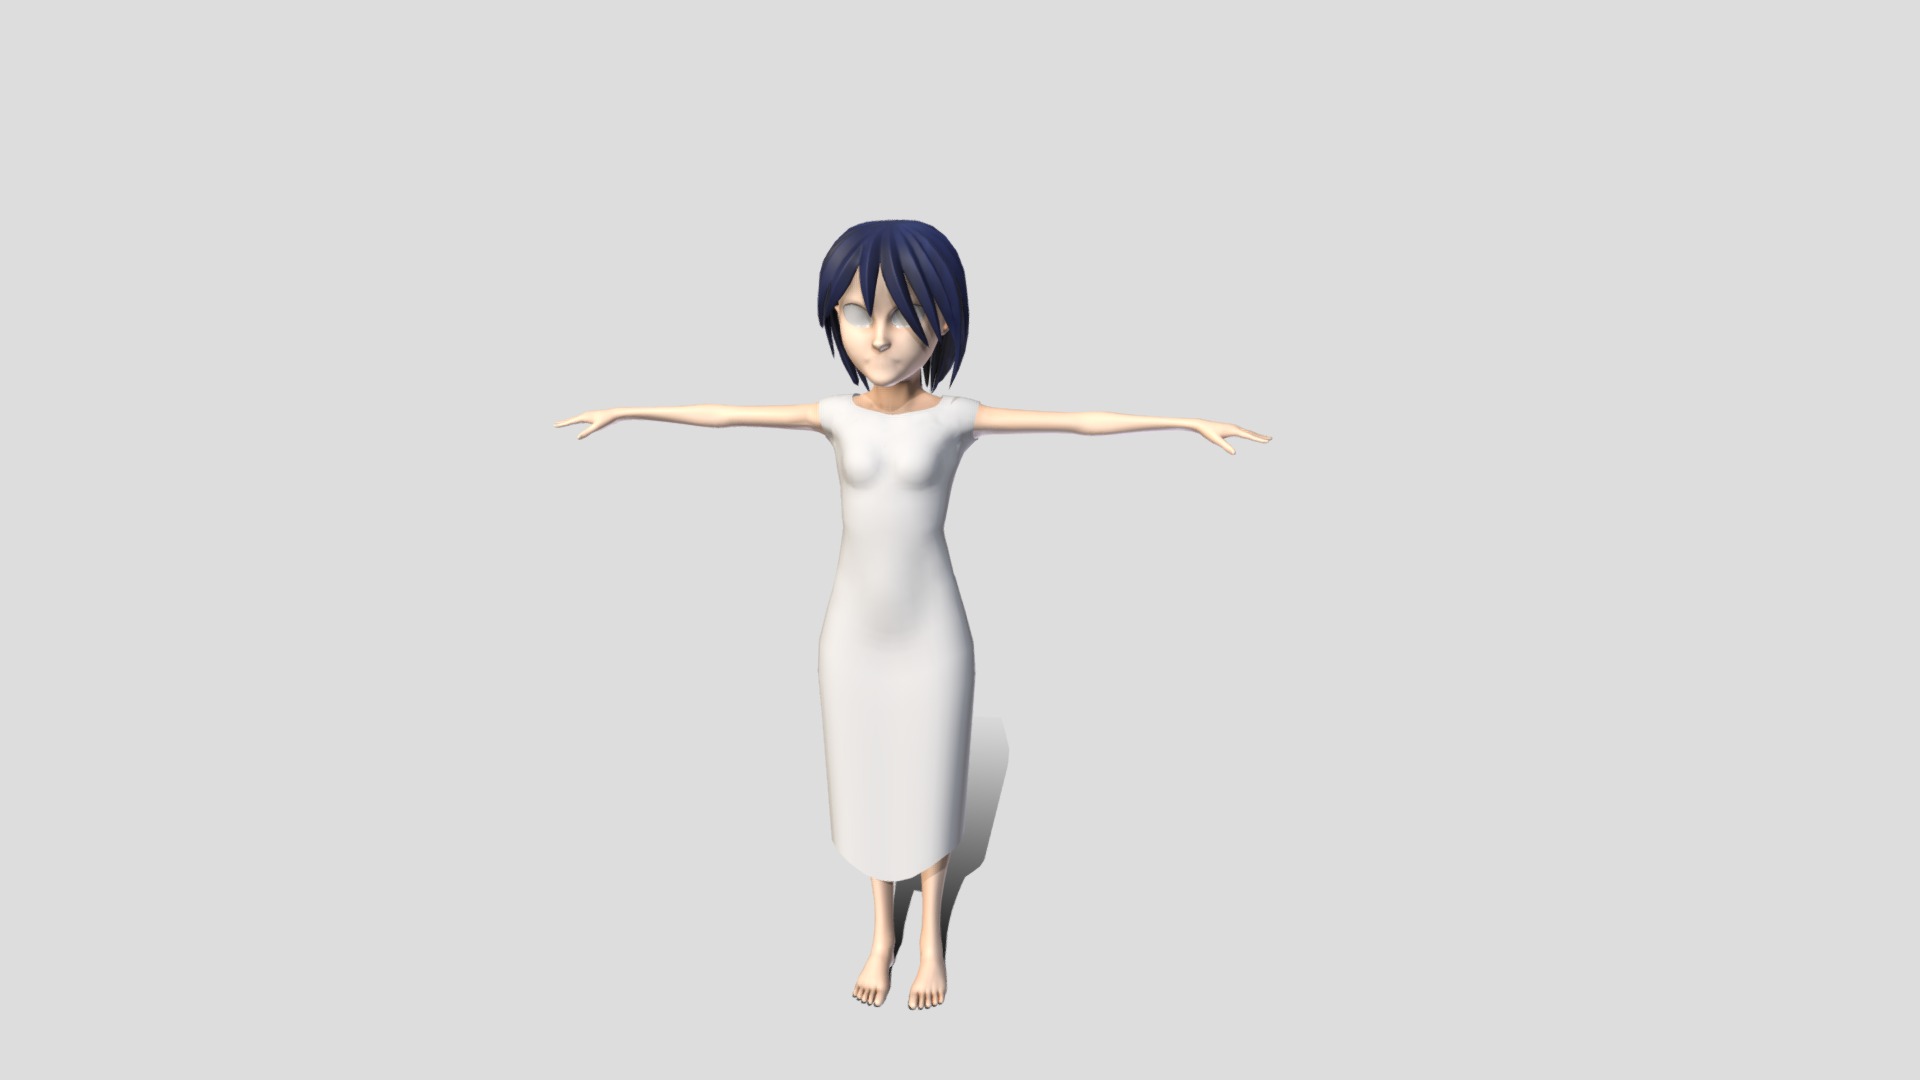 3D model Nia - This is a 3D model of the Nia. The 3D model is about a person in a white dress.